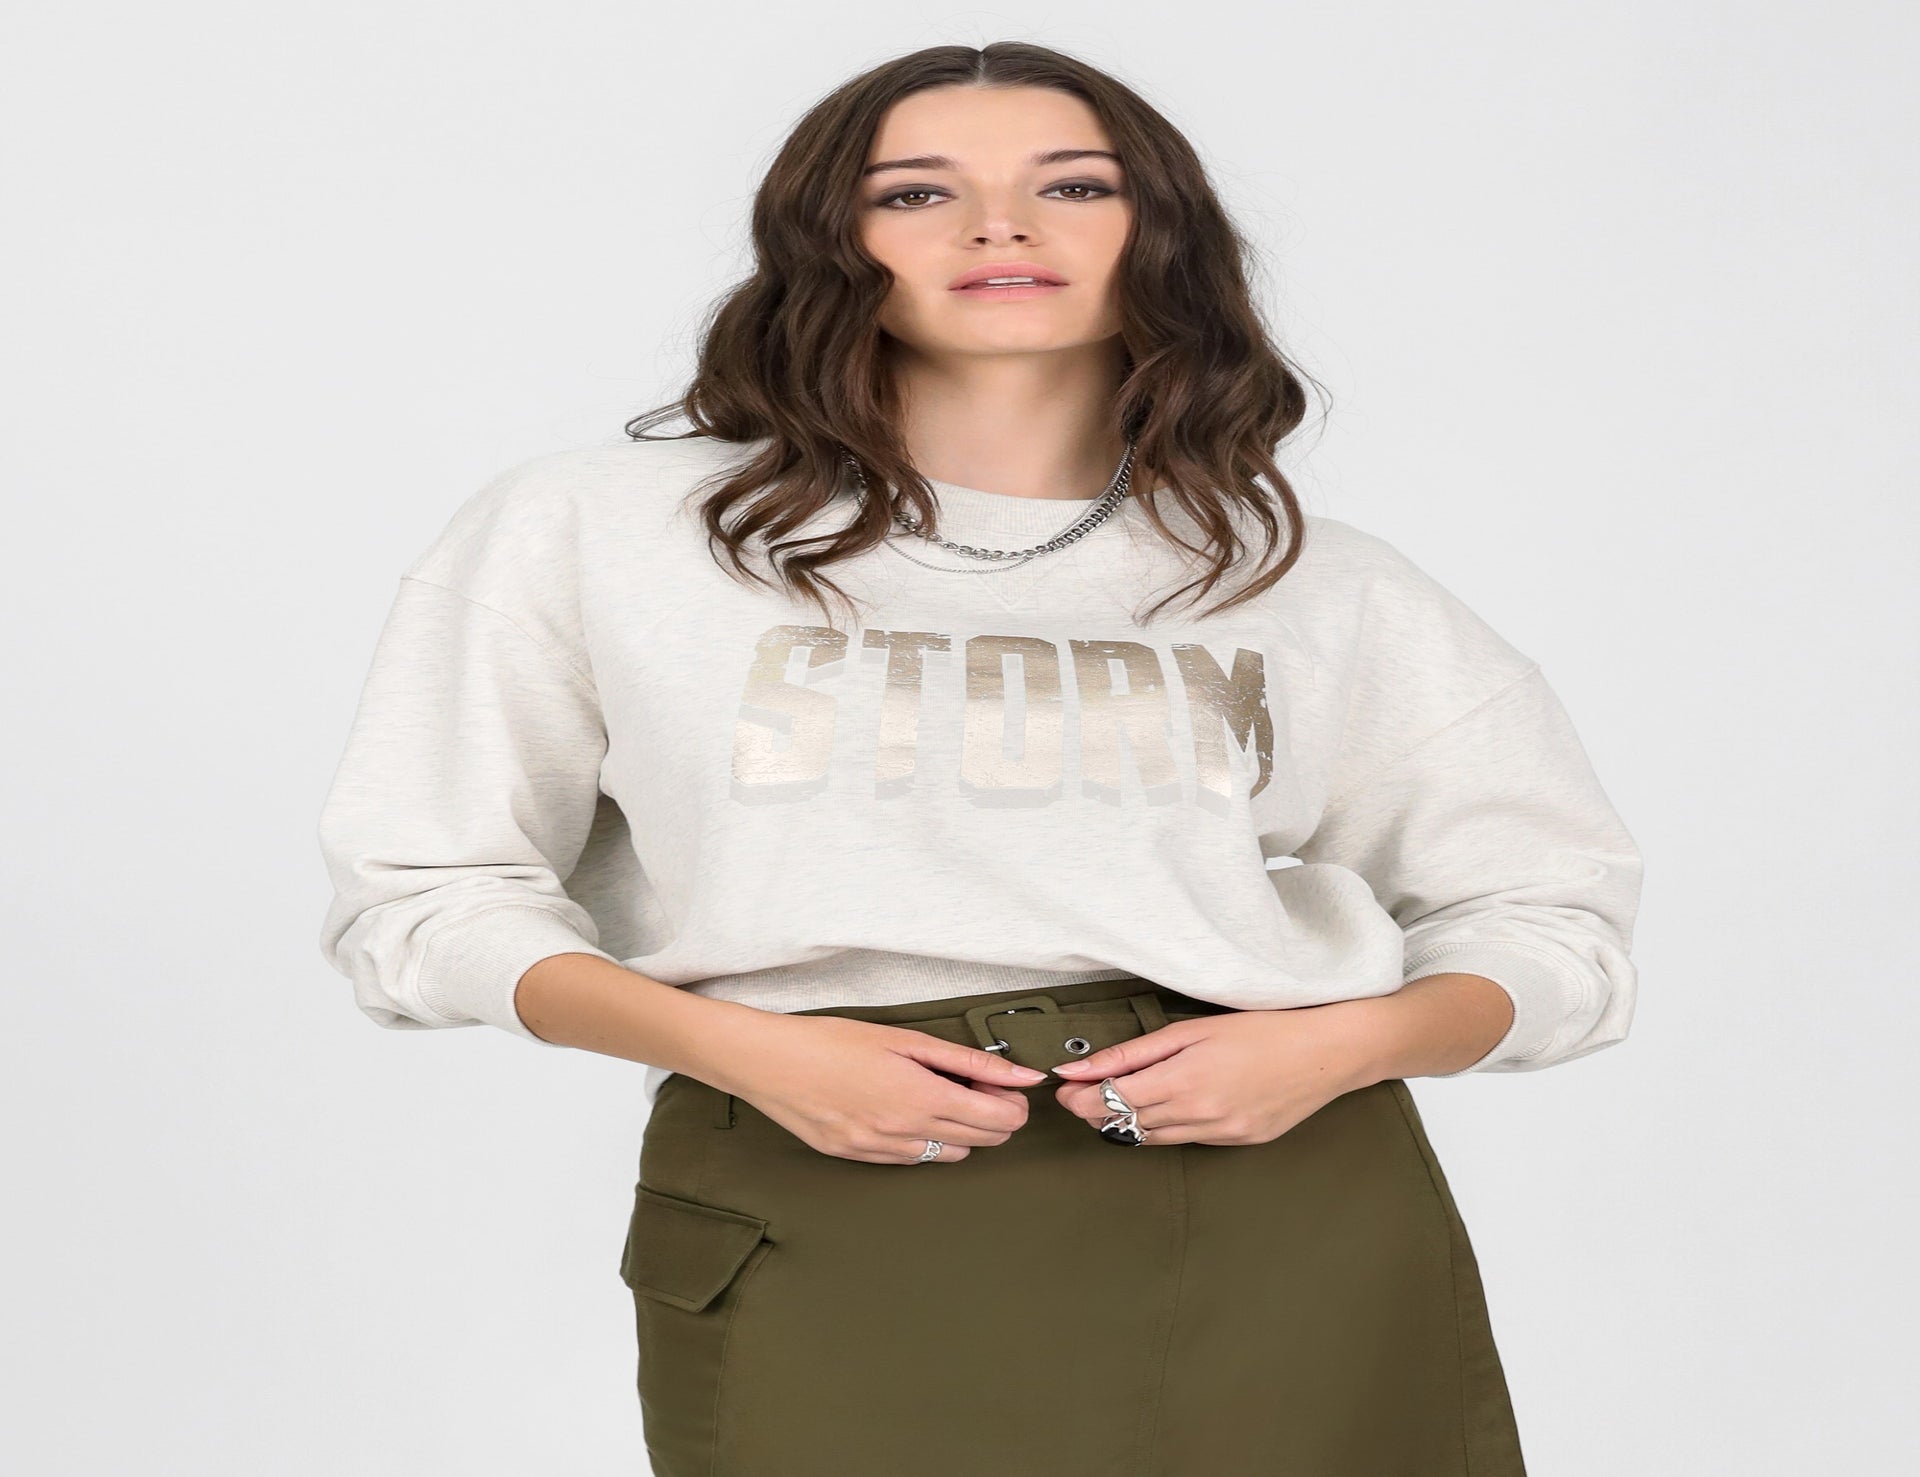 Storm Graphic Print Sweater - Gold - Tops - Long Sleeve - Women's ...